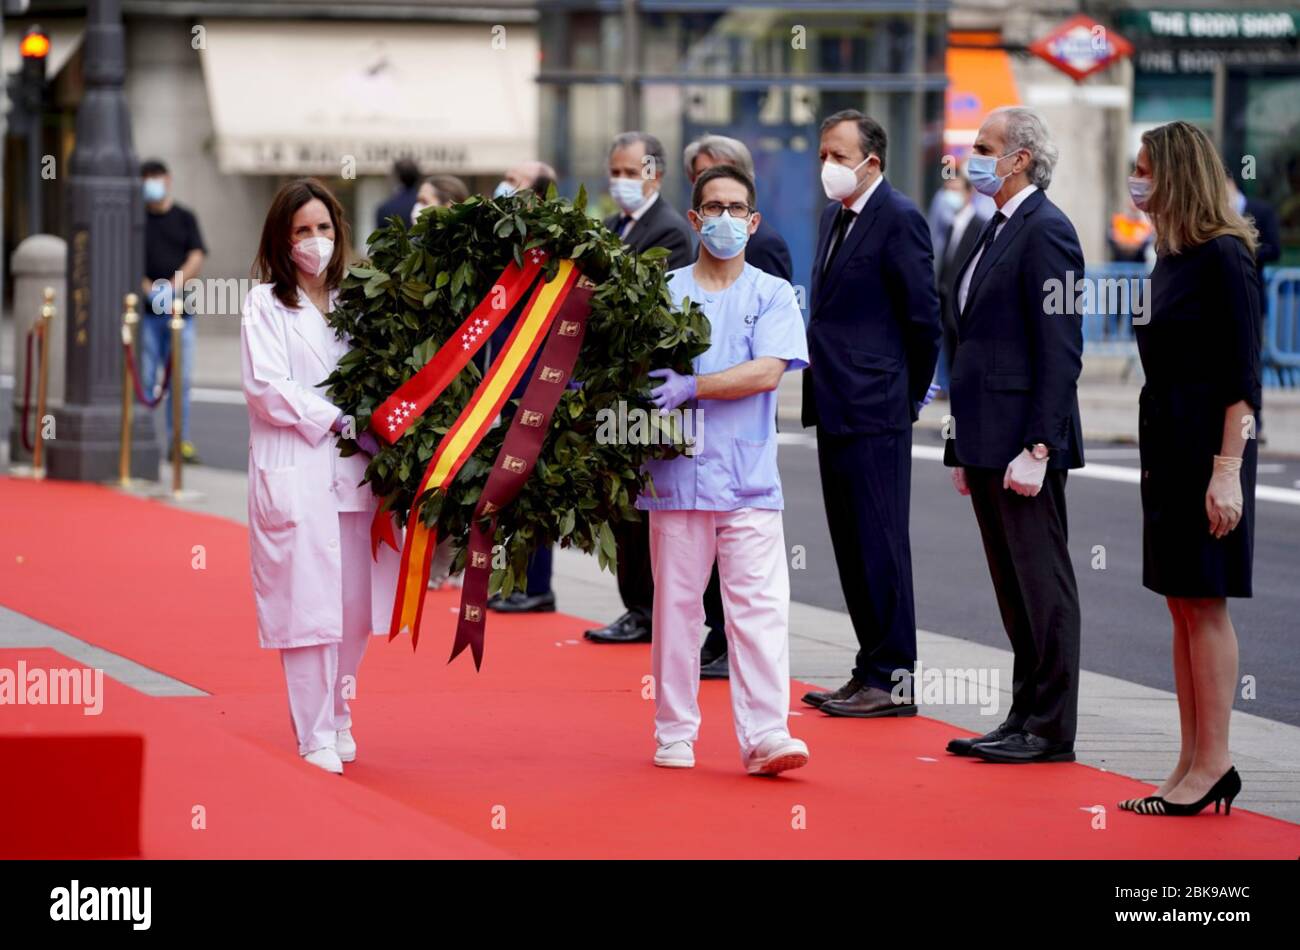 (200503) -- MADRID, May 3, 2020 (Xinhua) -- Two health workers carry a flower wreath during a moment of silence observed for COVID-19 victims at the Puerta del Sol square in Madrid, Spain, May 2, 2020. (Madrid Region Government/Handout via Xinhua) Stock Photo